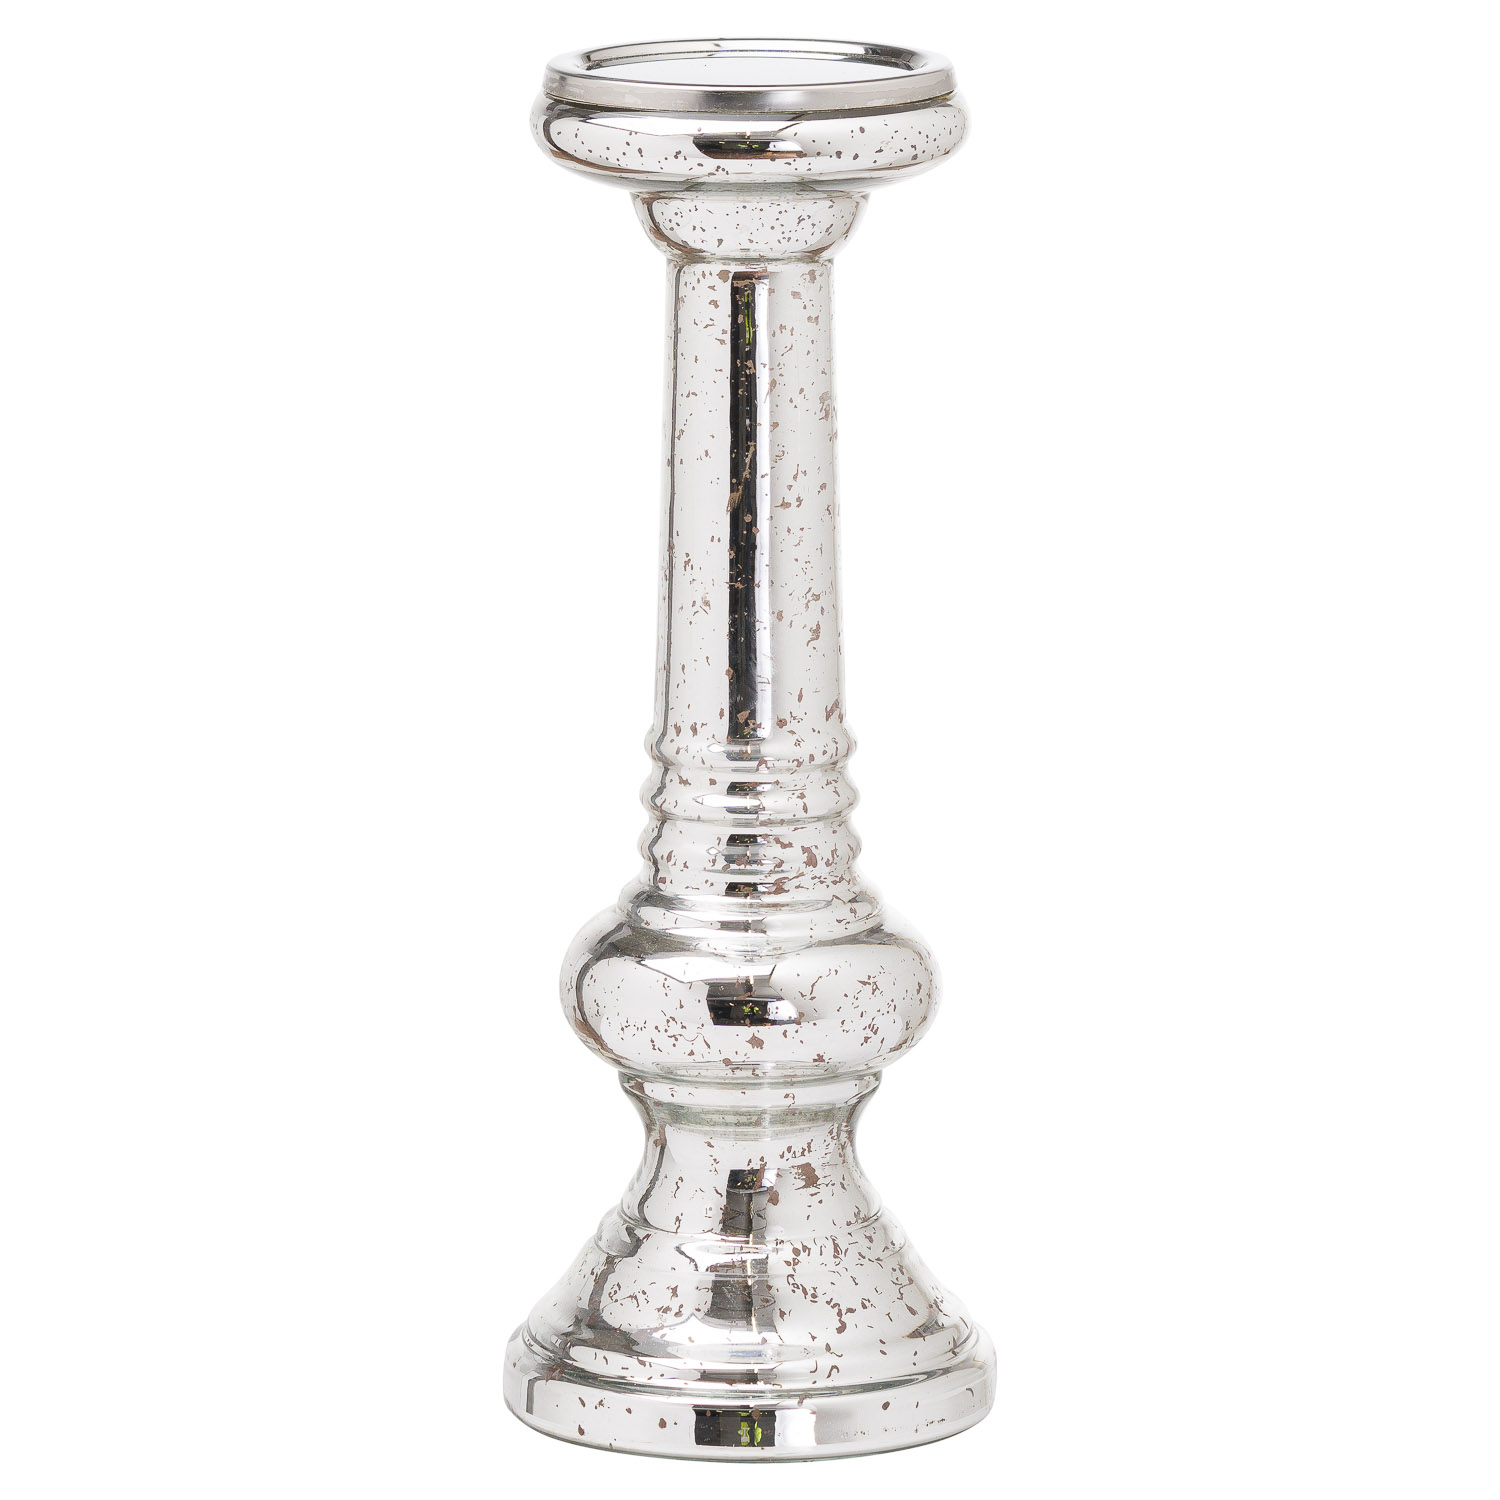 Large Silver Metallic Glass Candle Stand - Image 1